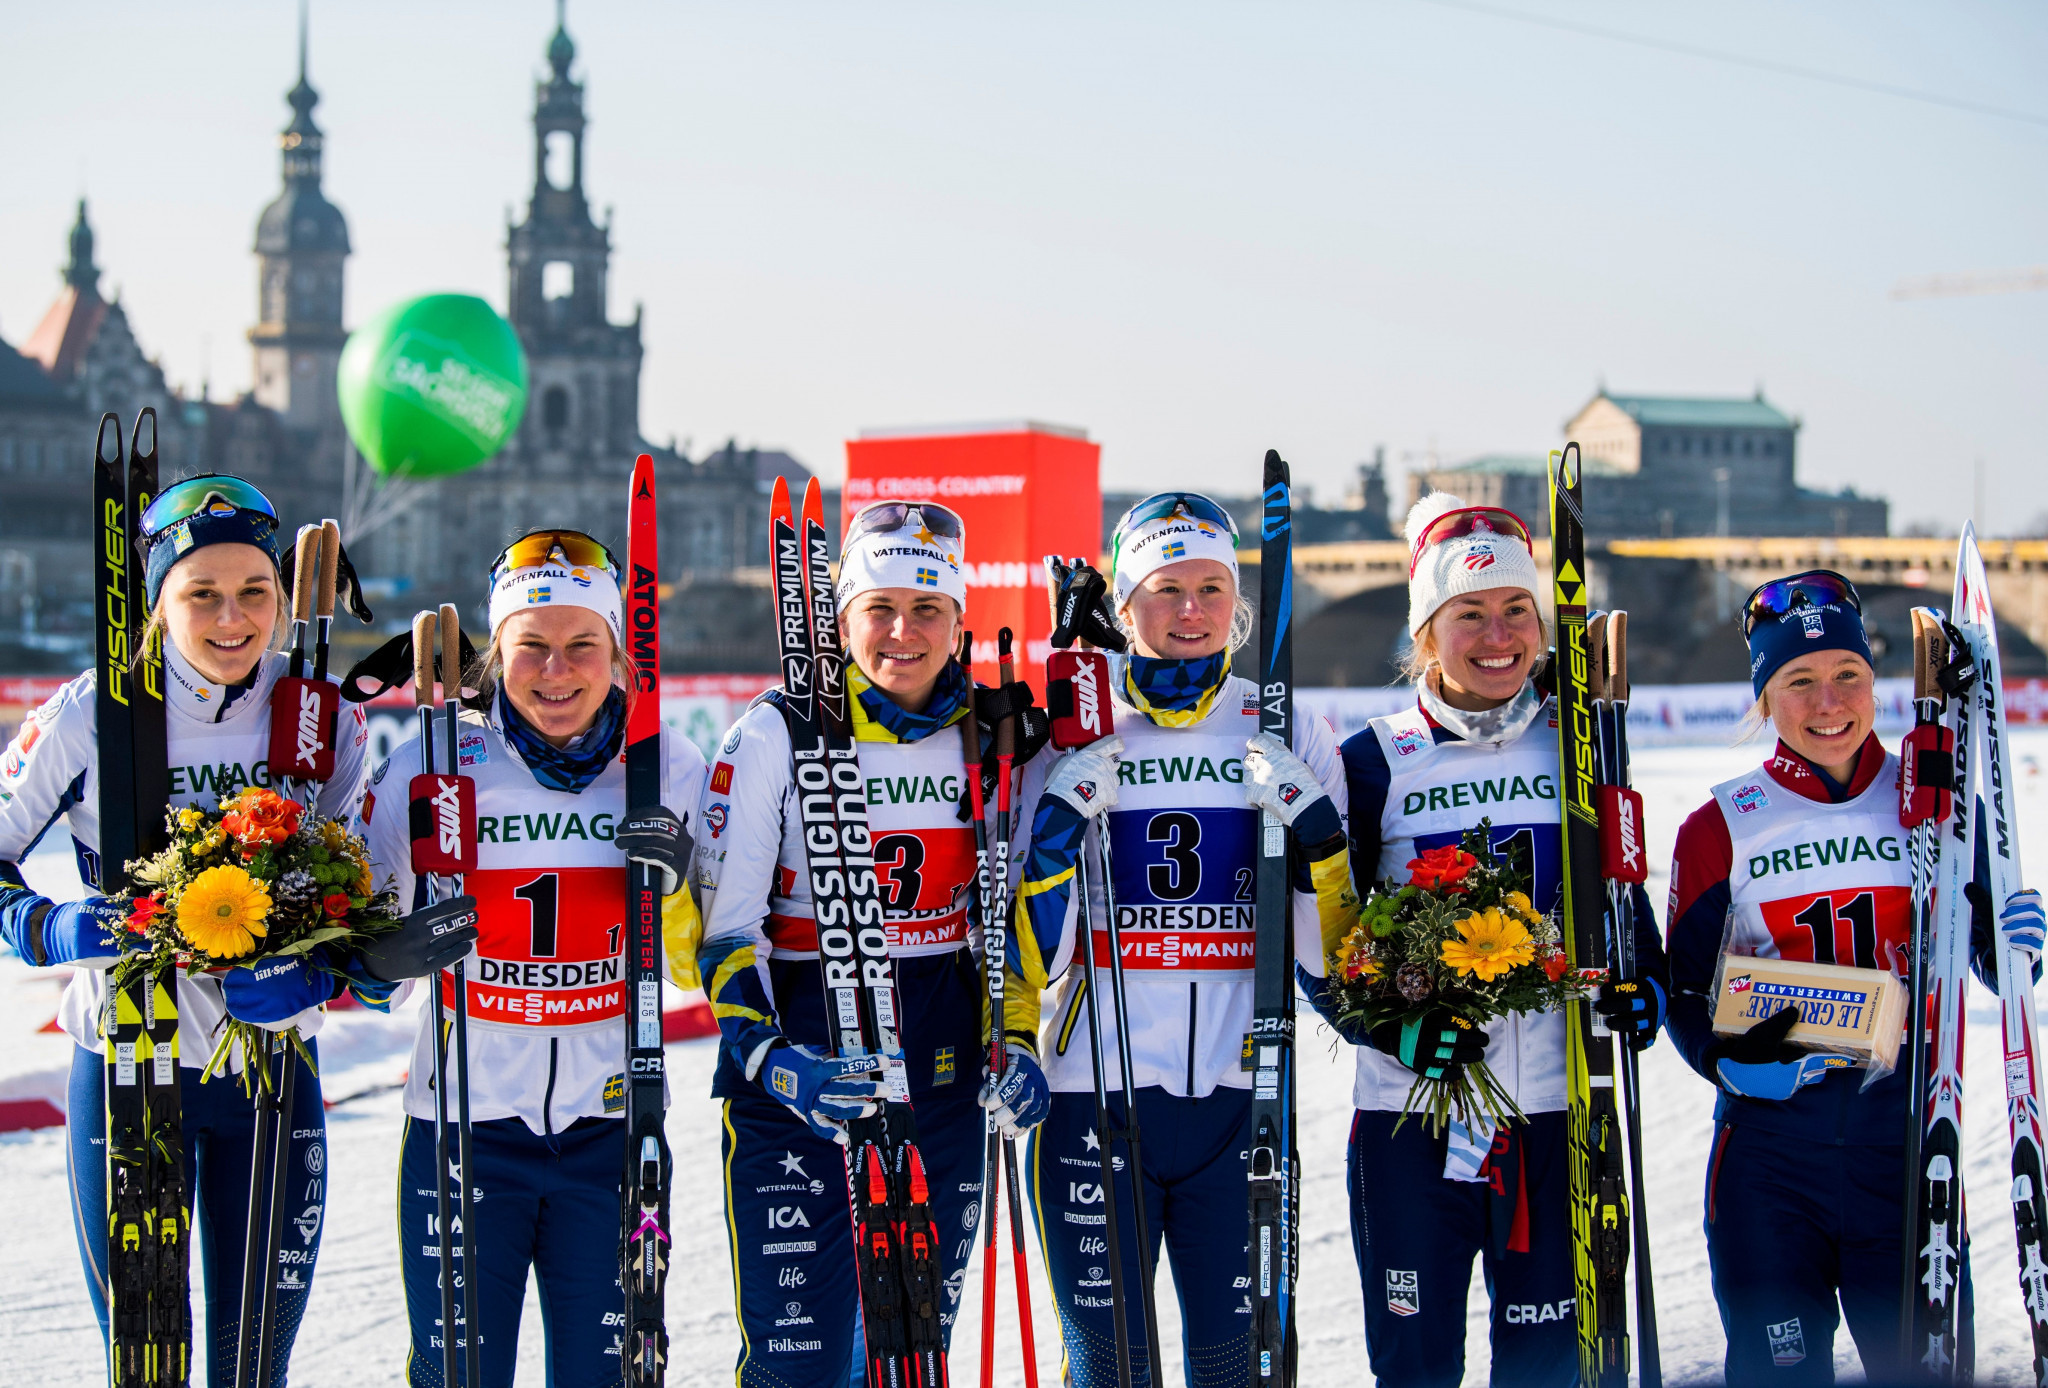 Italy and Sweden win team sprints at FIS CrossCountry World Cup in Dresden